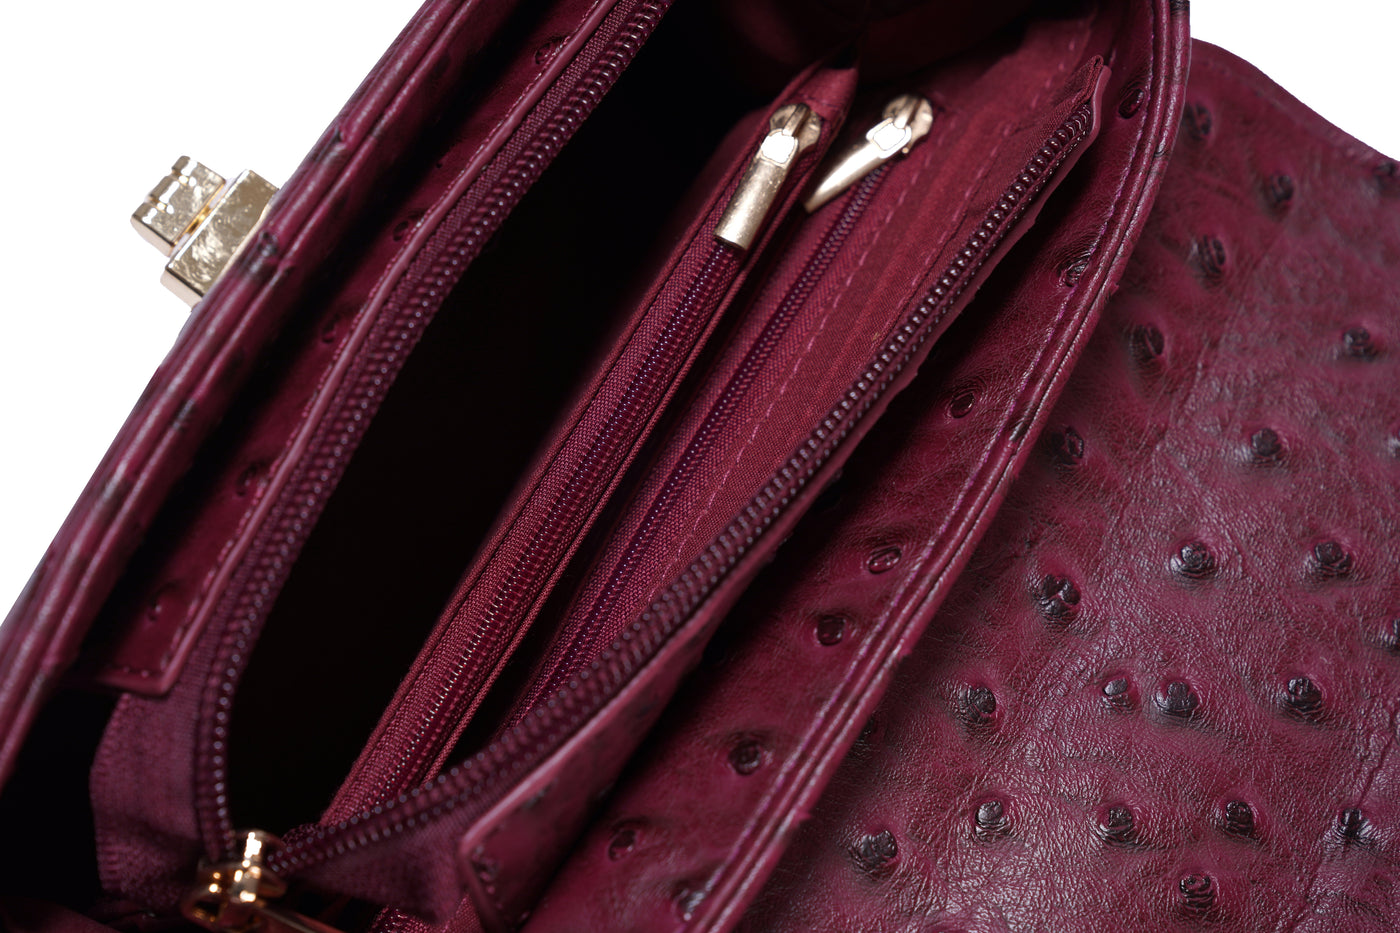 Classic Flap Bag with Handle in Burgundy